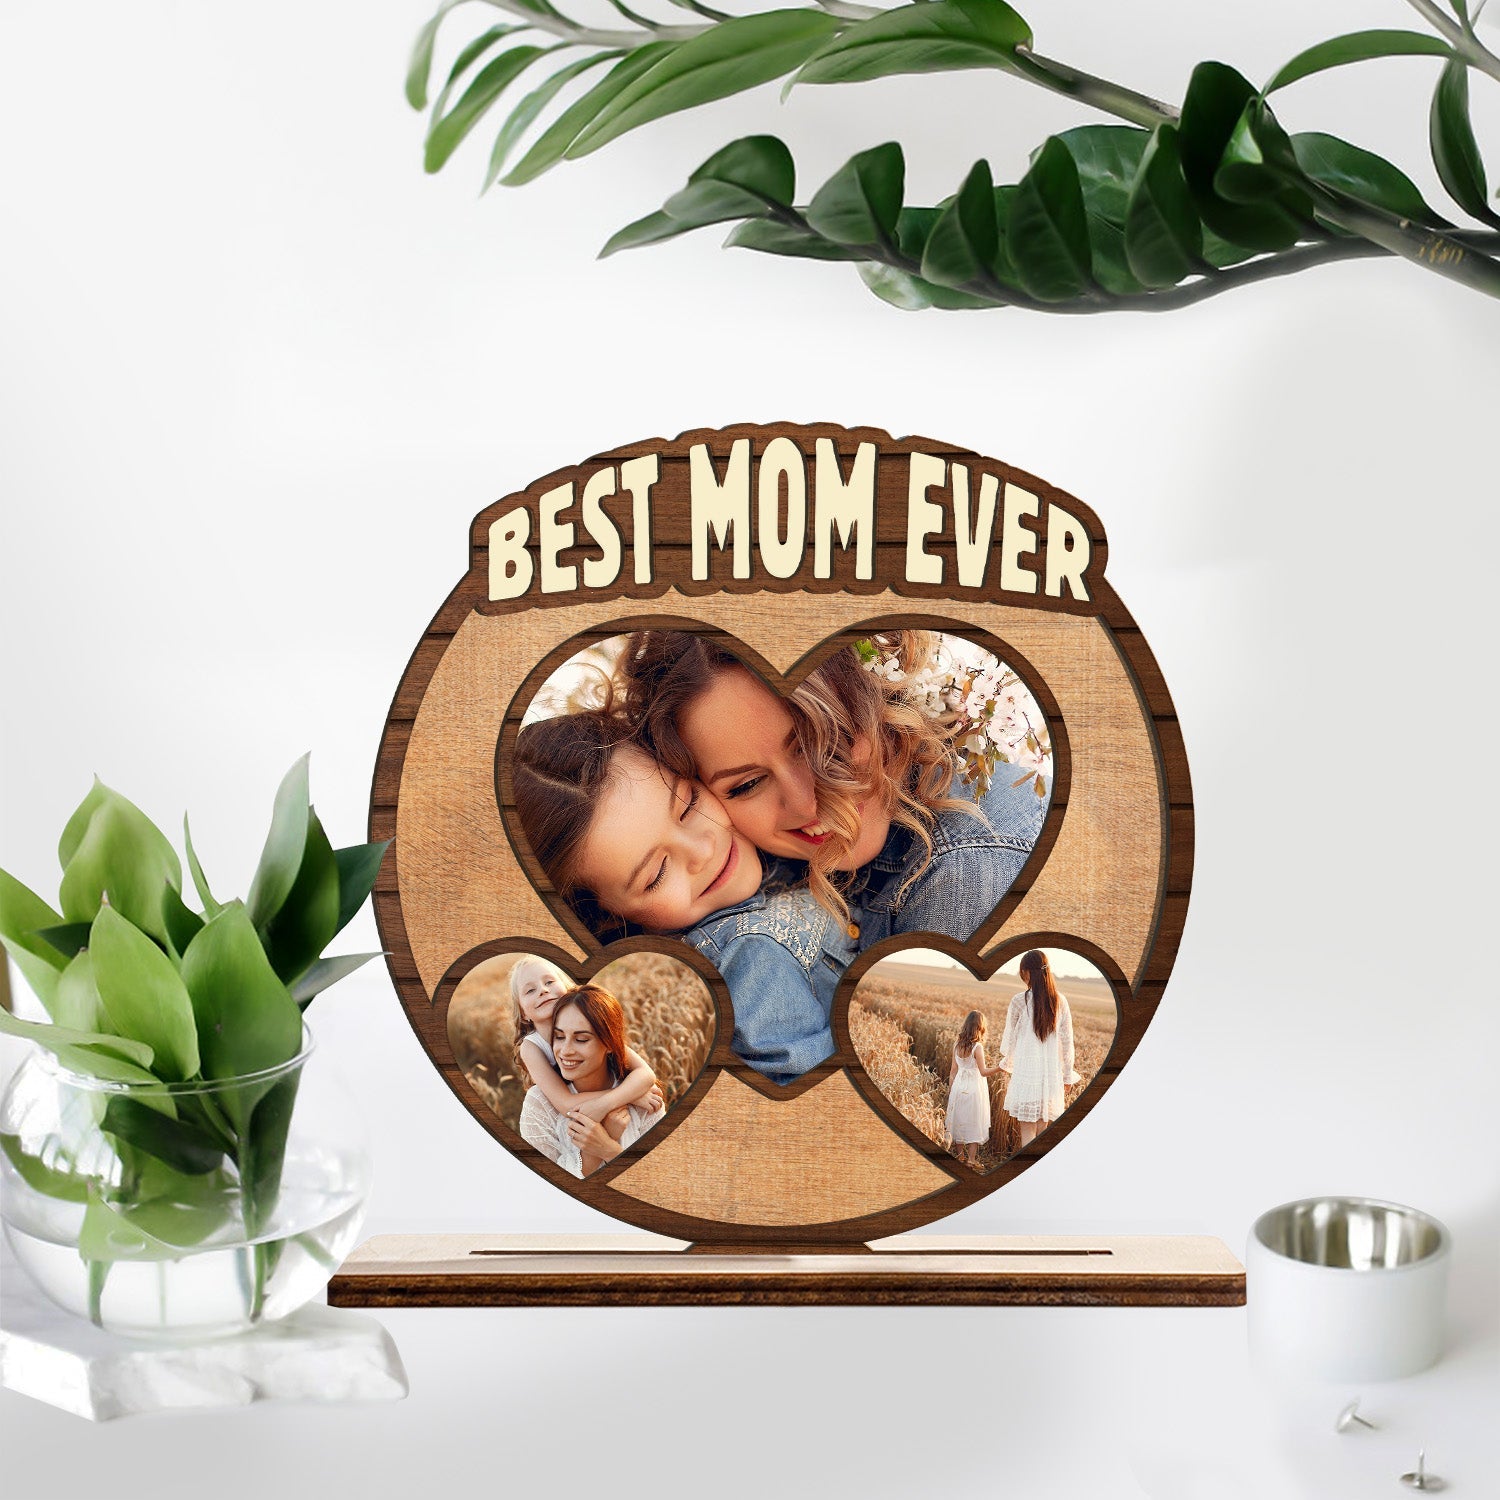 Best Mom Ever, Custom Photo, 3 Hearts Shape, Wooden Plaque 3 Layers